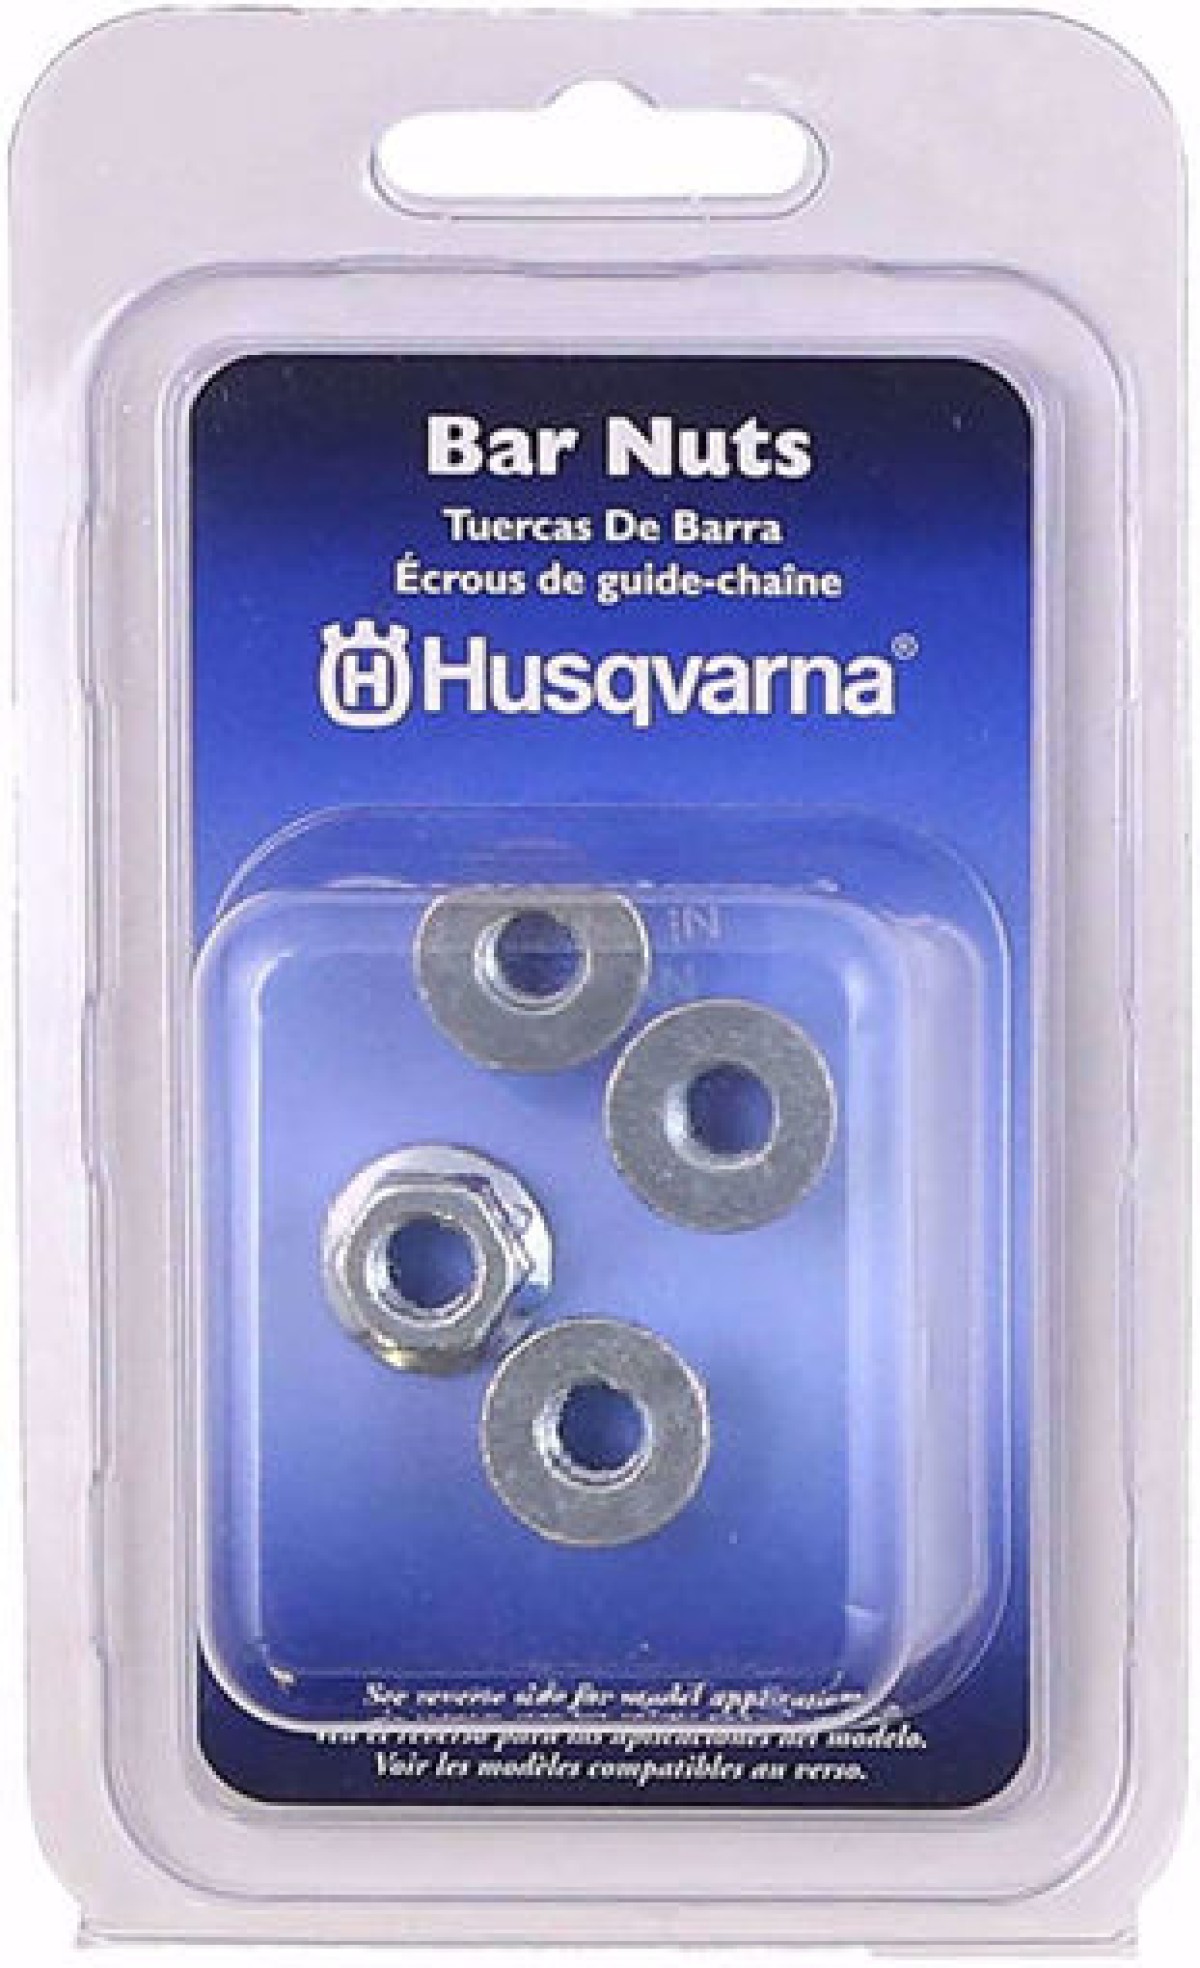 BAR NUTS IN CLAM Ref: Bar Nuts